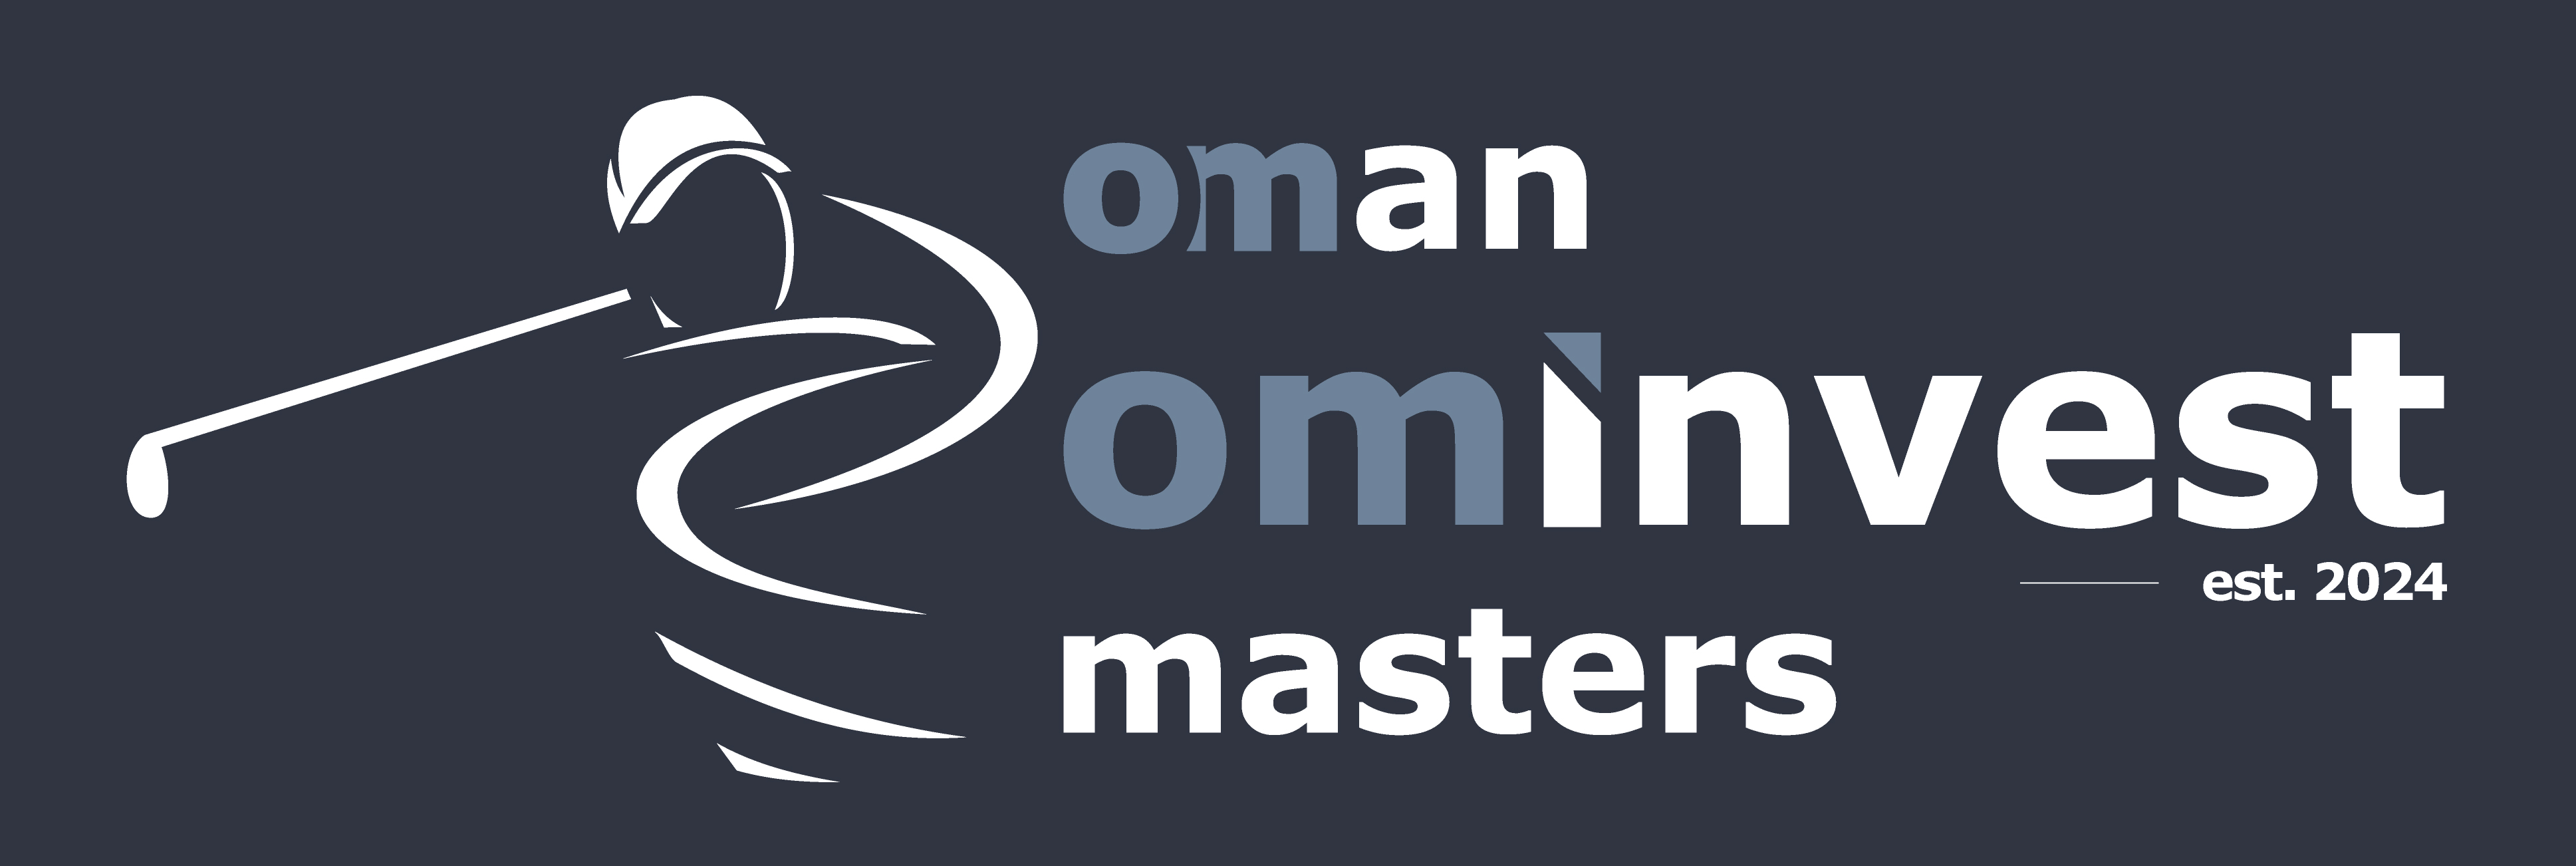 Oman Ominvest Masters 2024